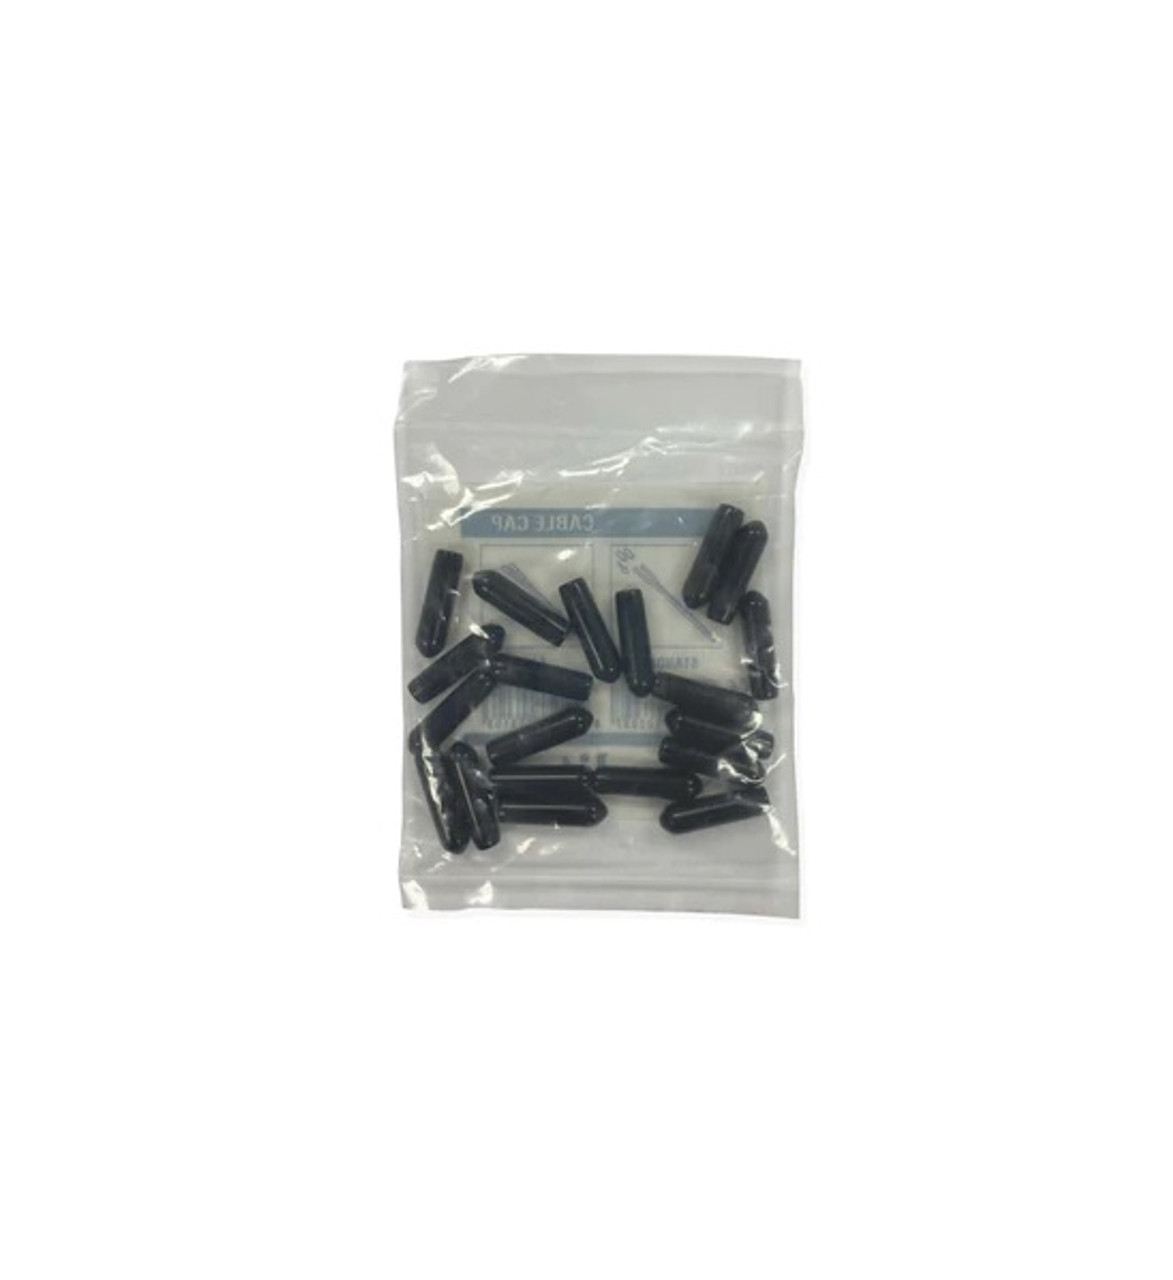 in-lite Standard Cable Caps - 20 pk